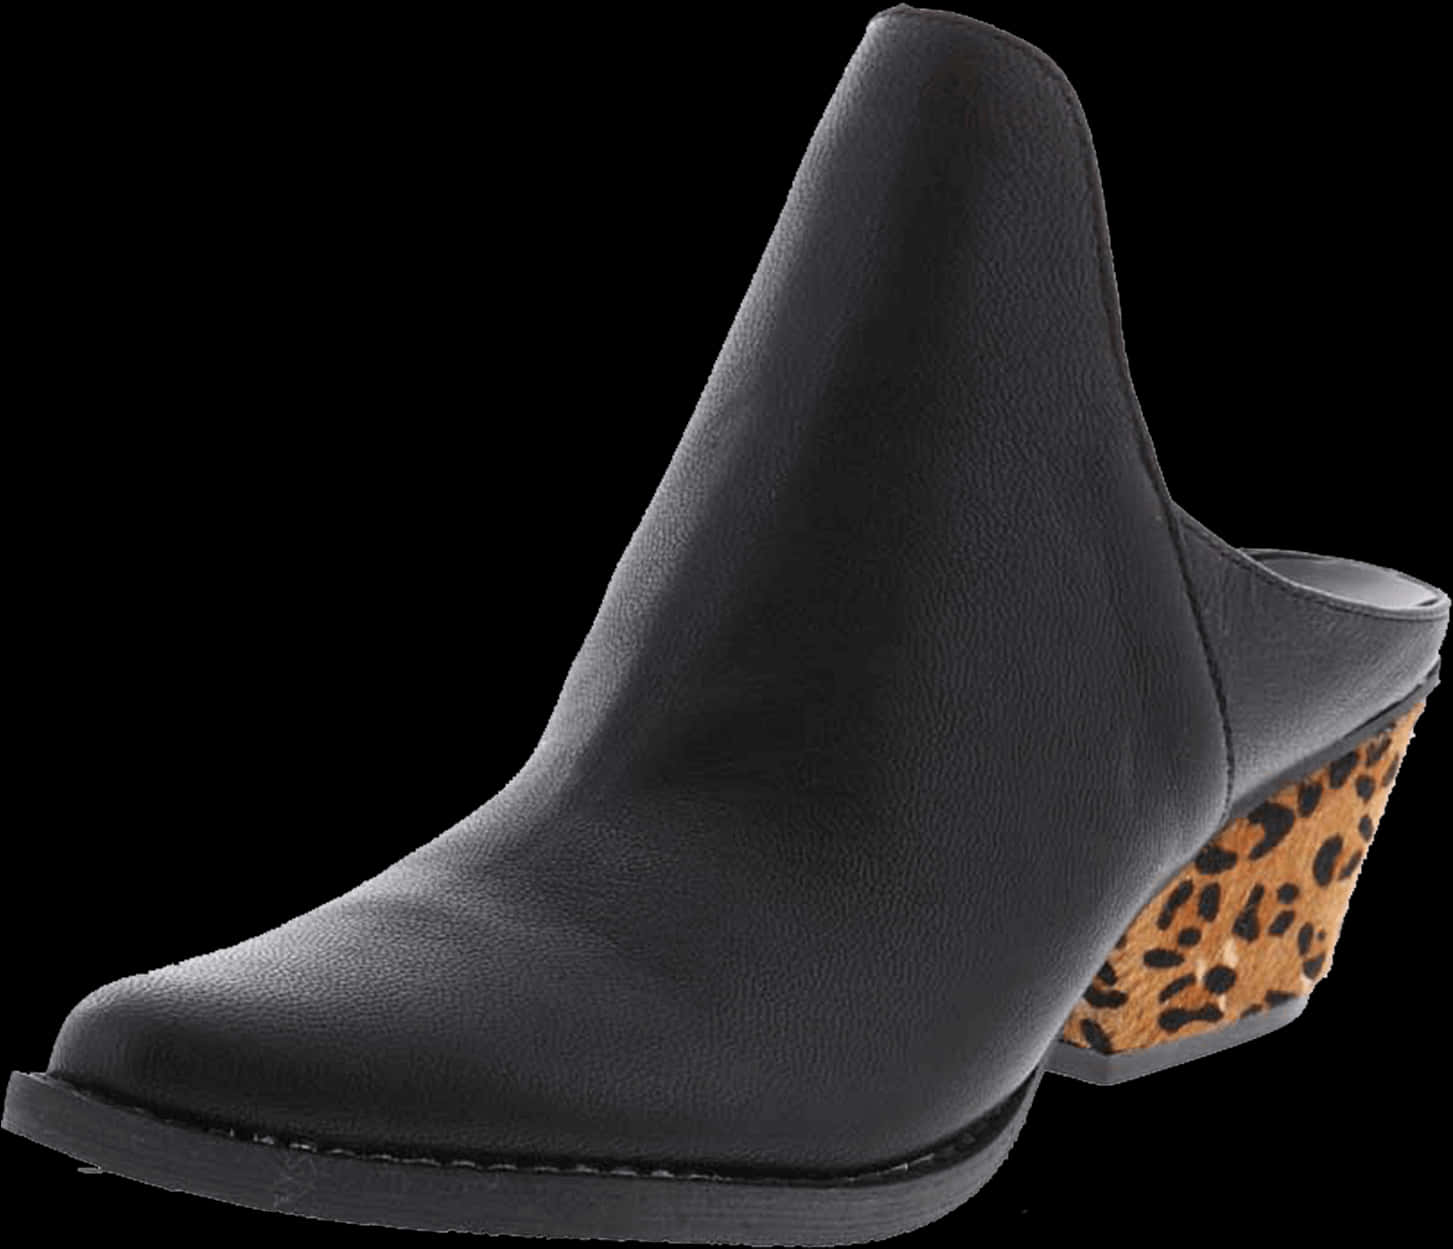 A Black Leather Shoe With Leopard Print On The Heel